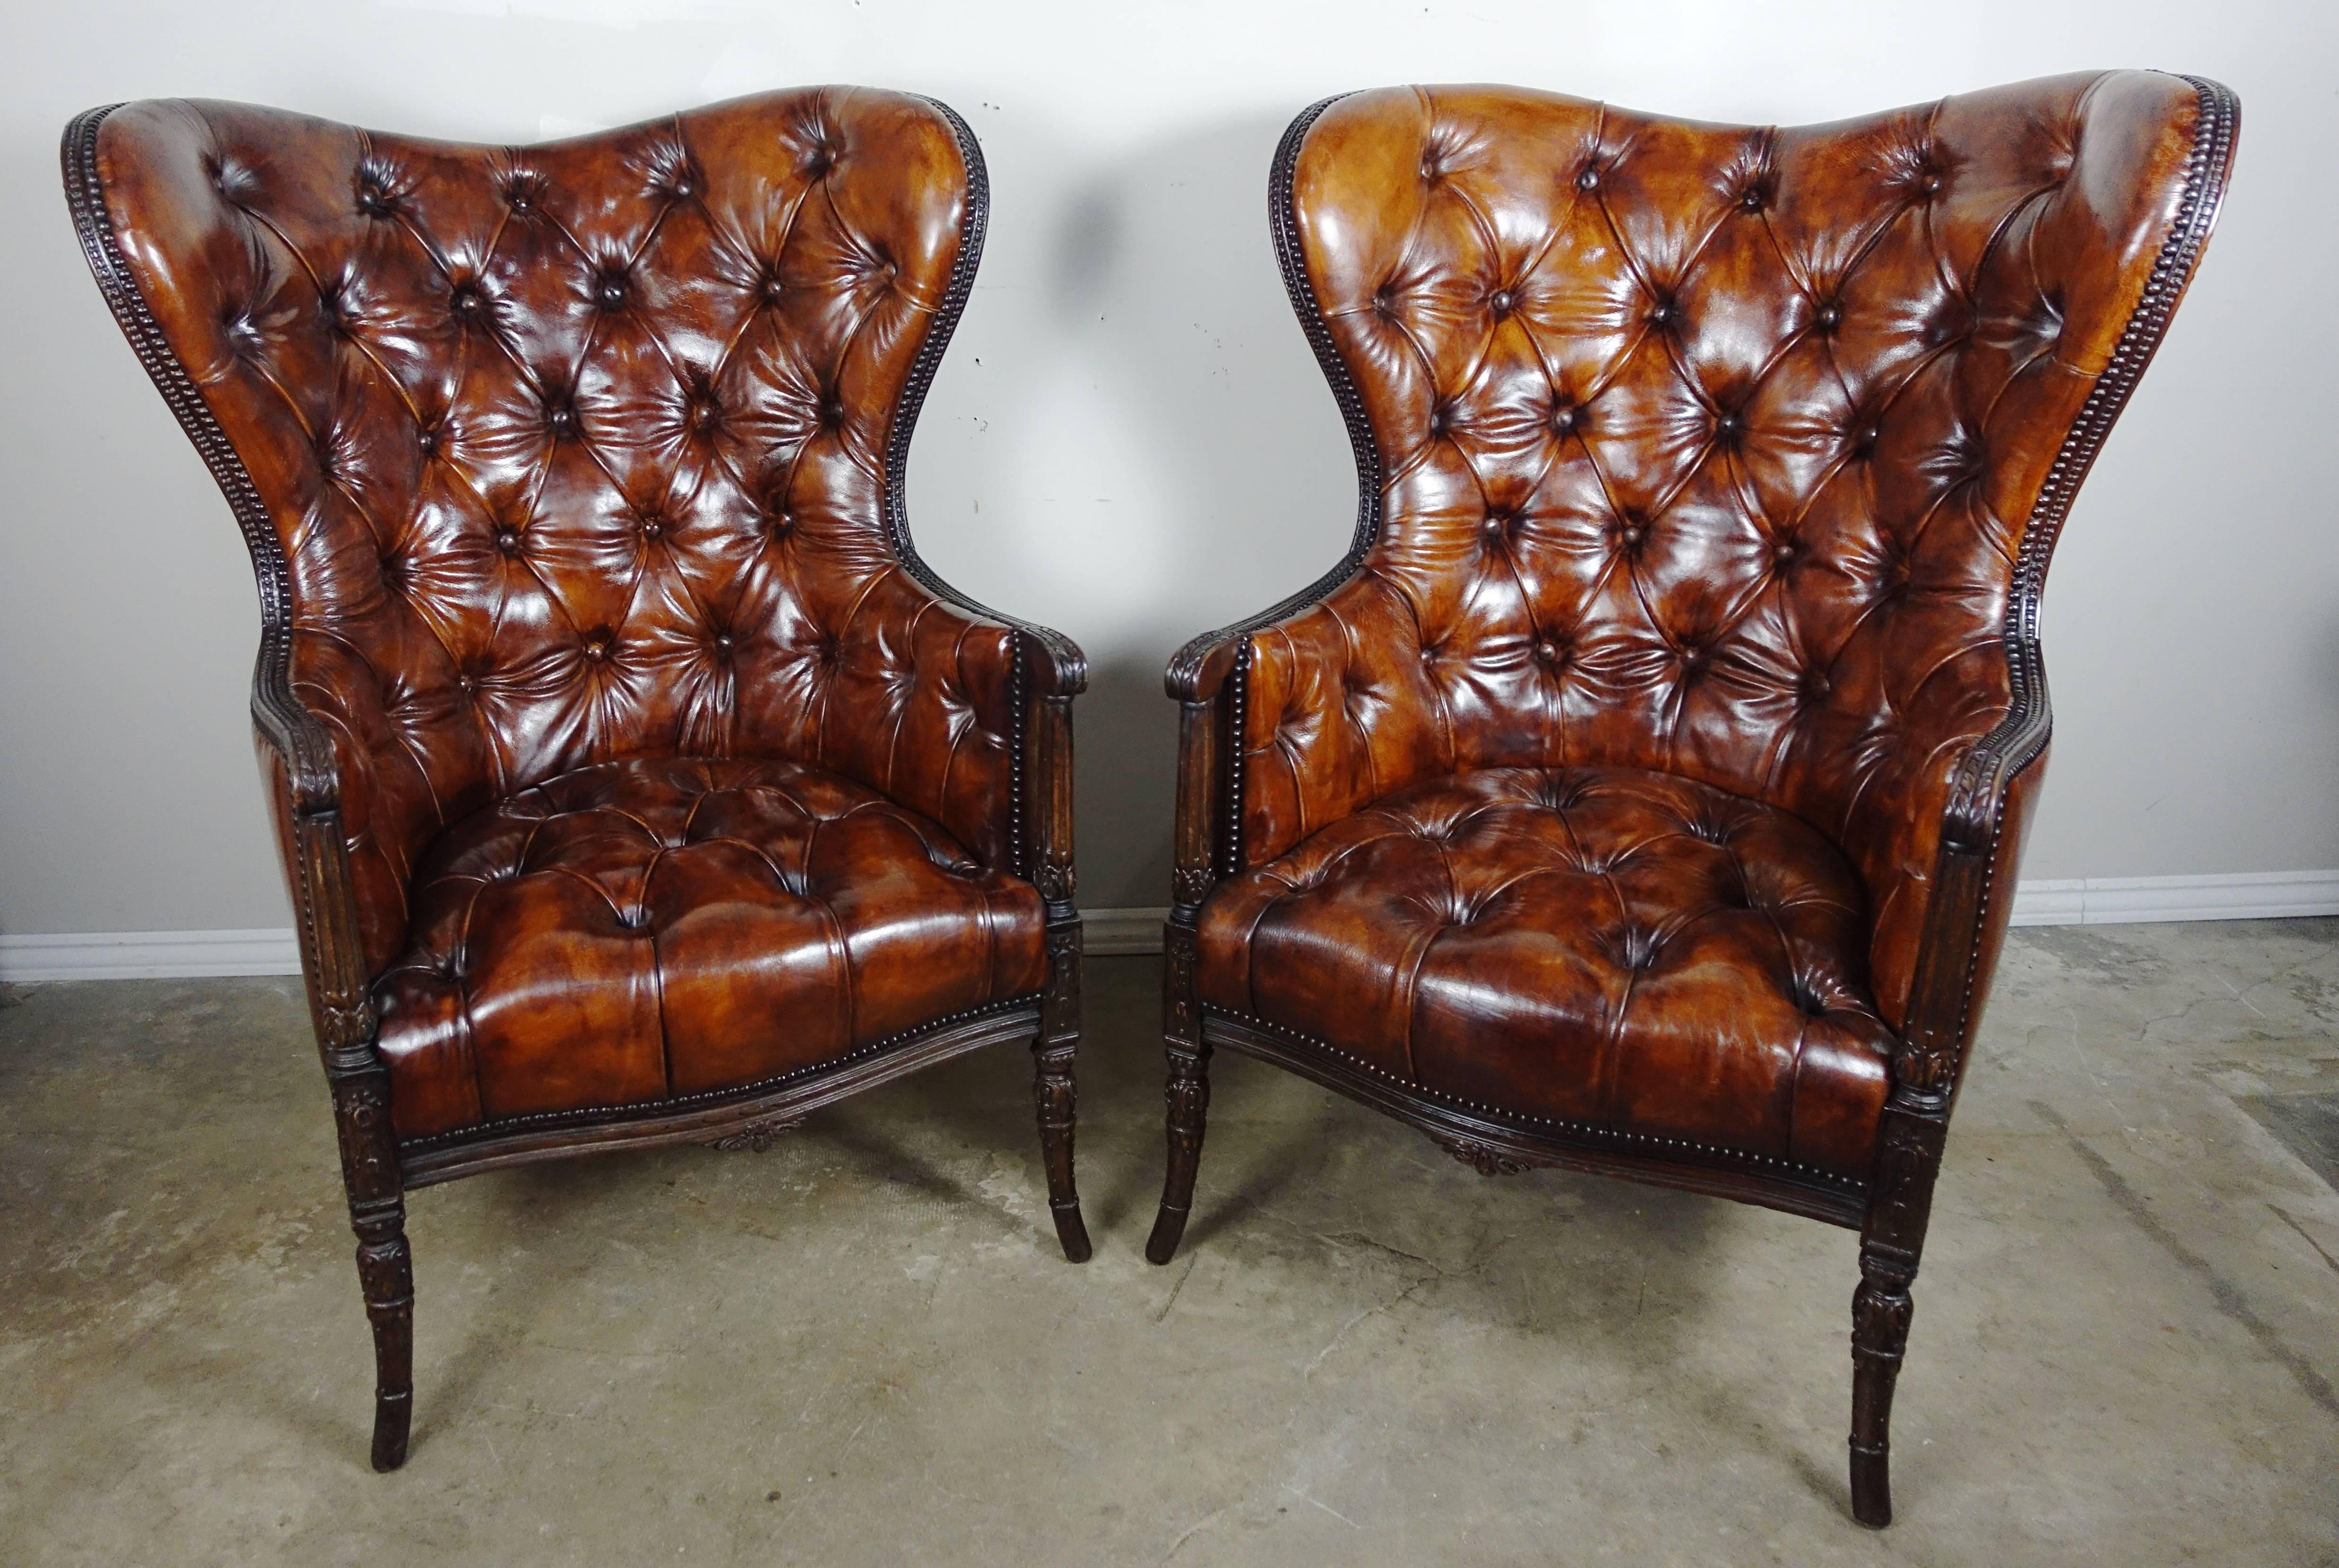 Pair of French wingback rich cognac colored leather tufted armchairs standing on four tapered carved legs. Brass nailhead trim detail.